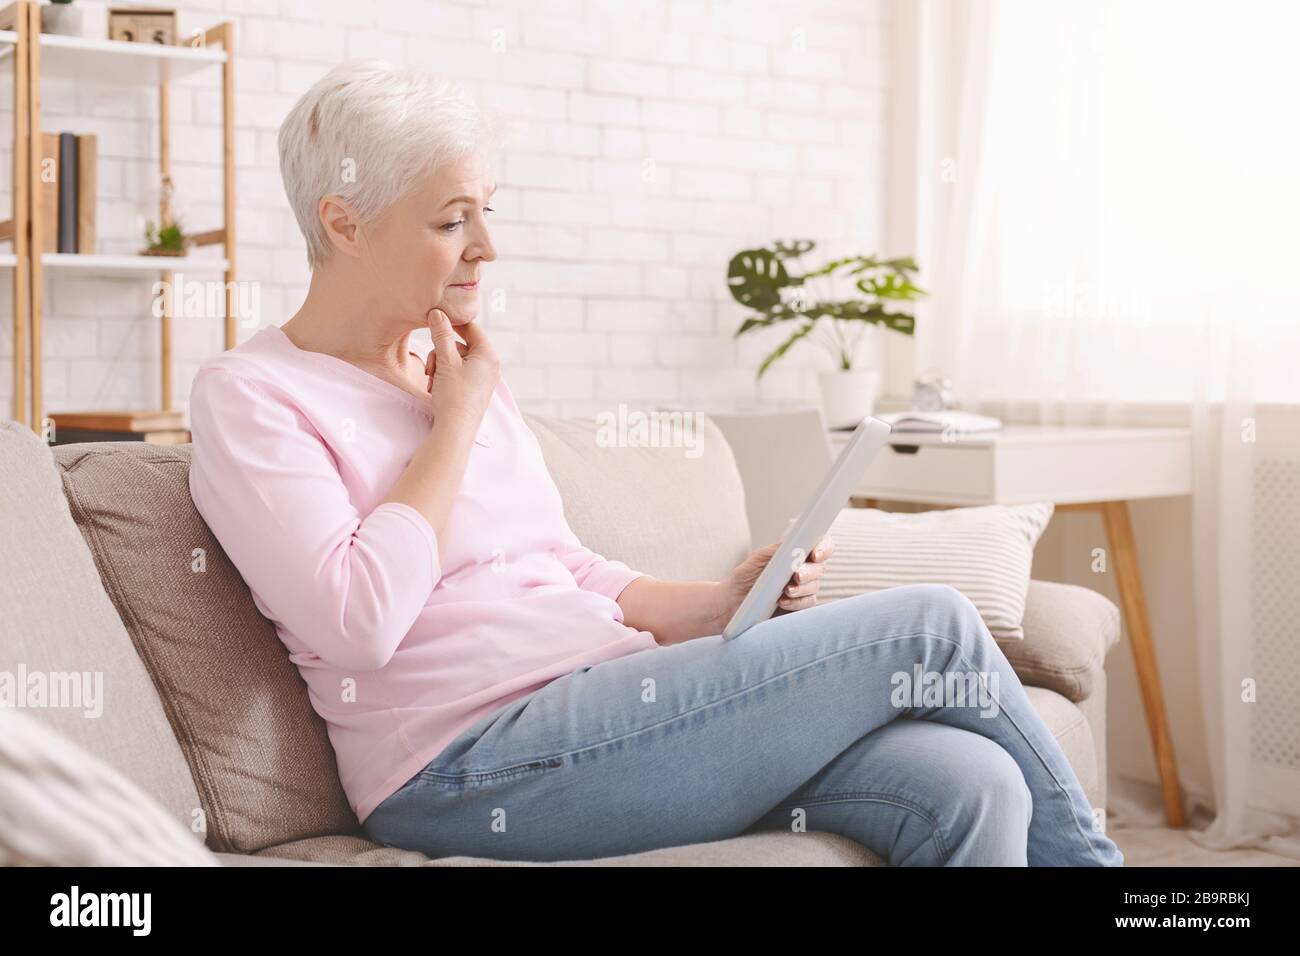 Worried senior woman reading Covid-19 news articles Stock Photo